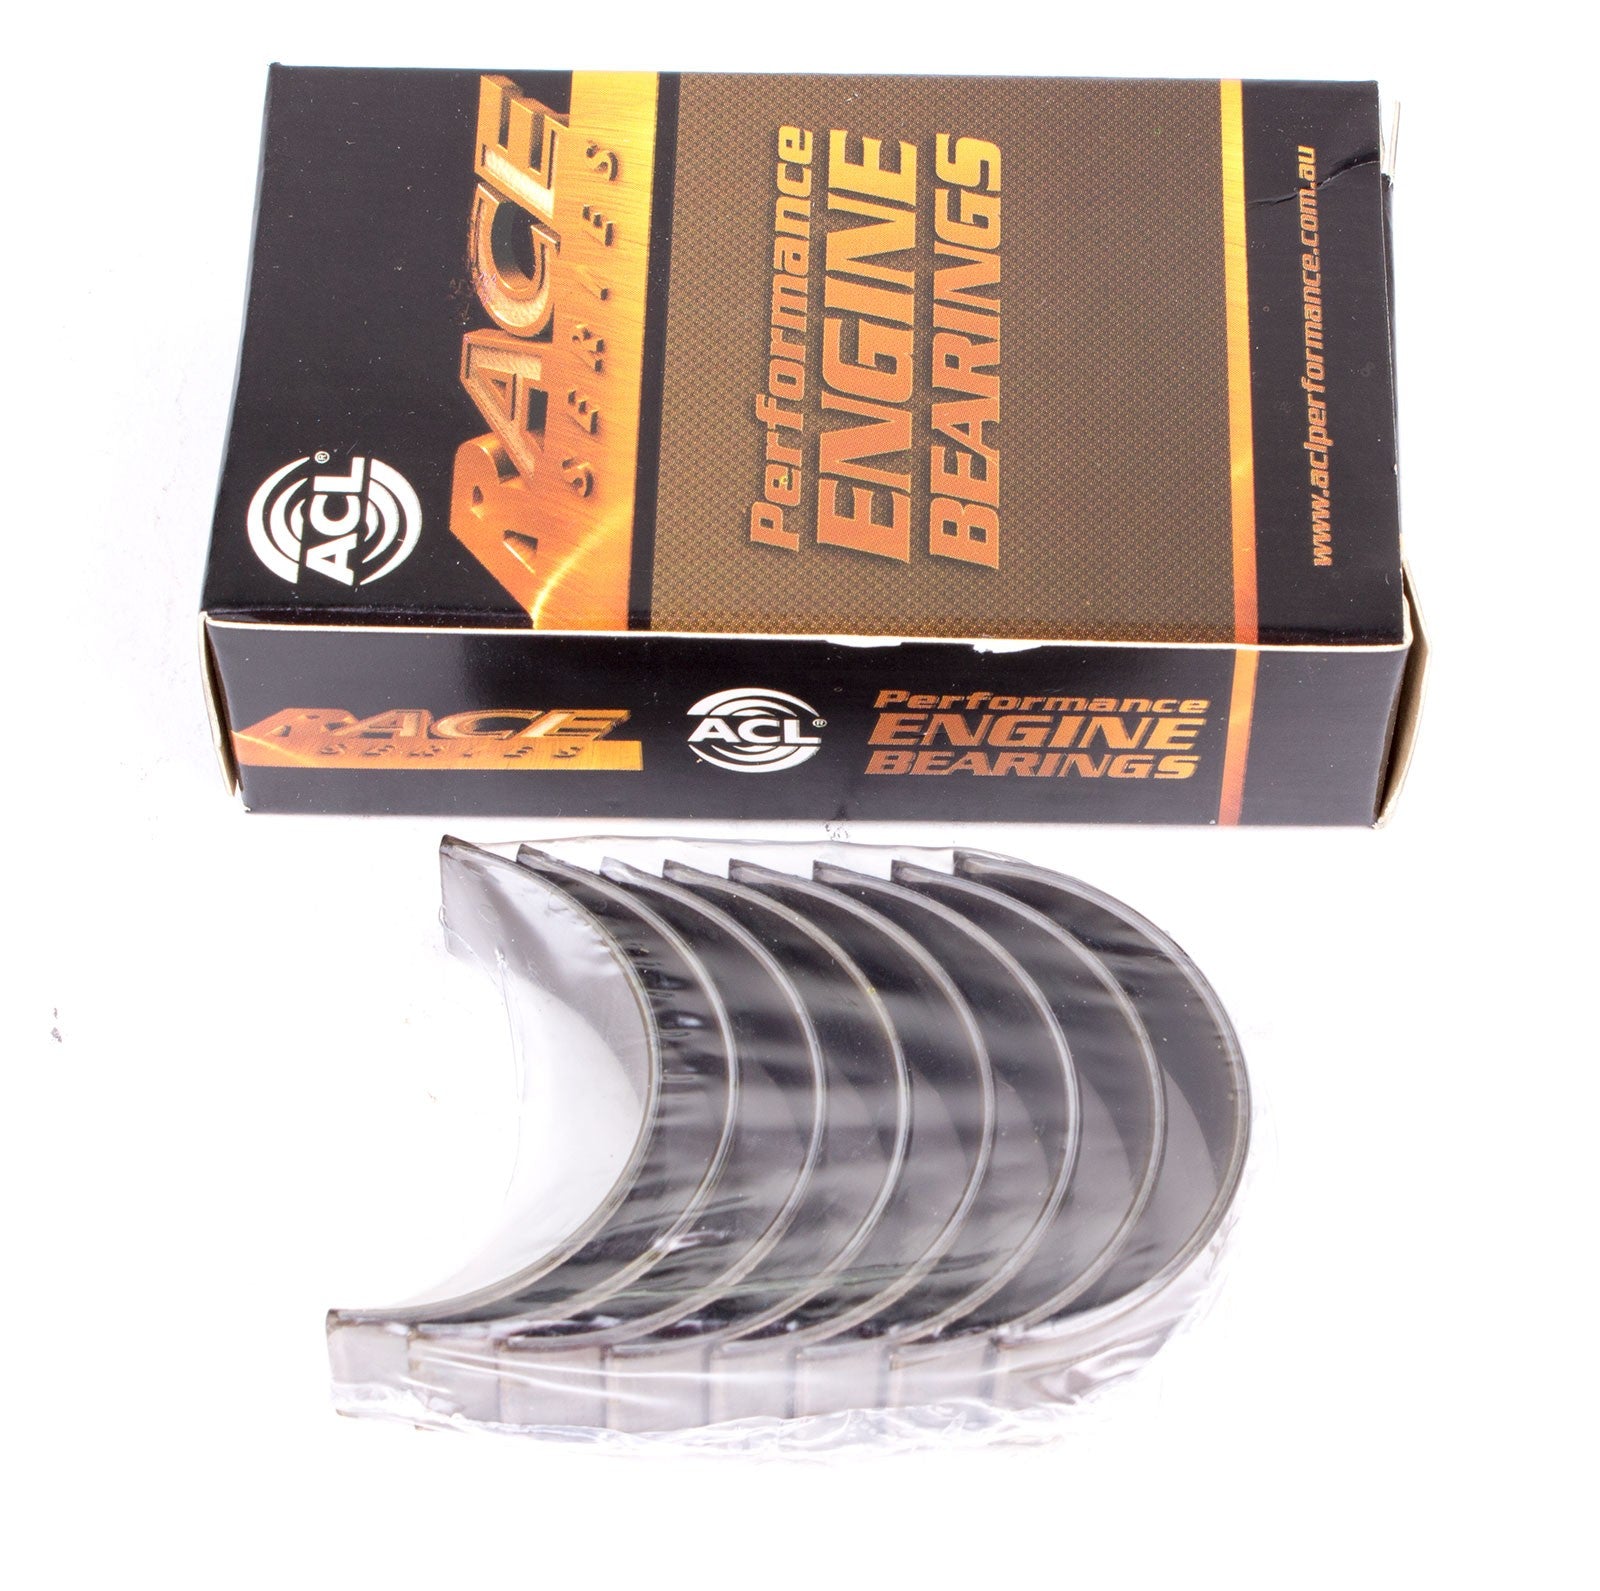 ACL 5M2357H-020 Main bearing set (ACL Race Series) Photo-0 